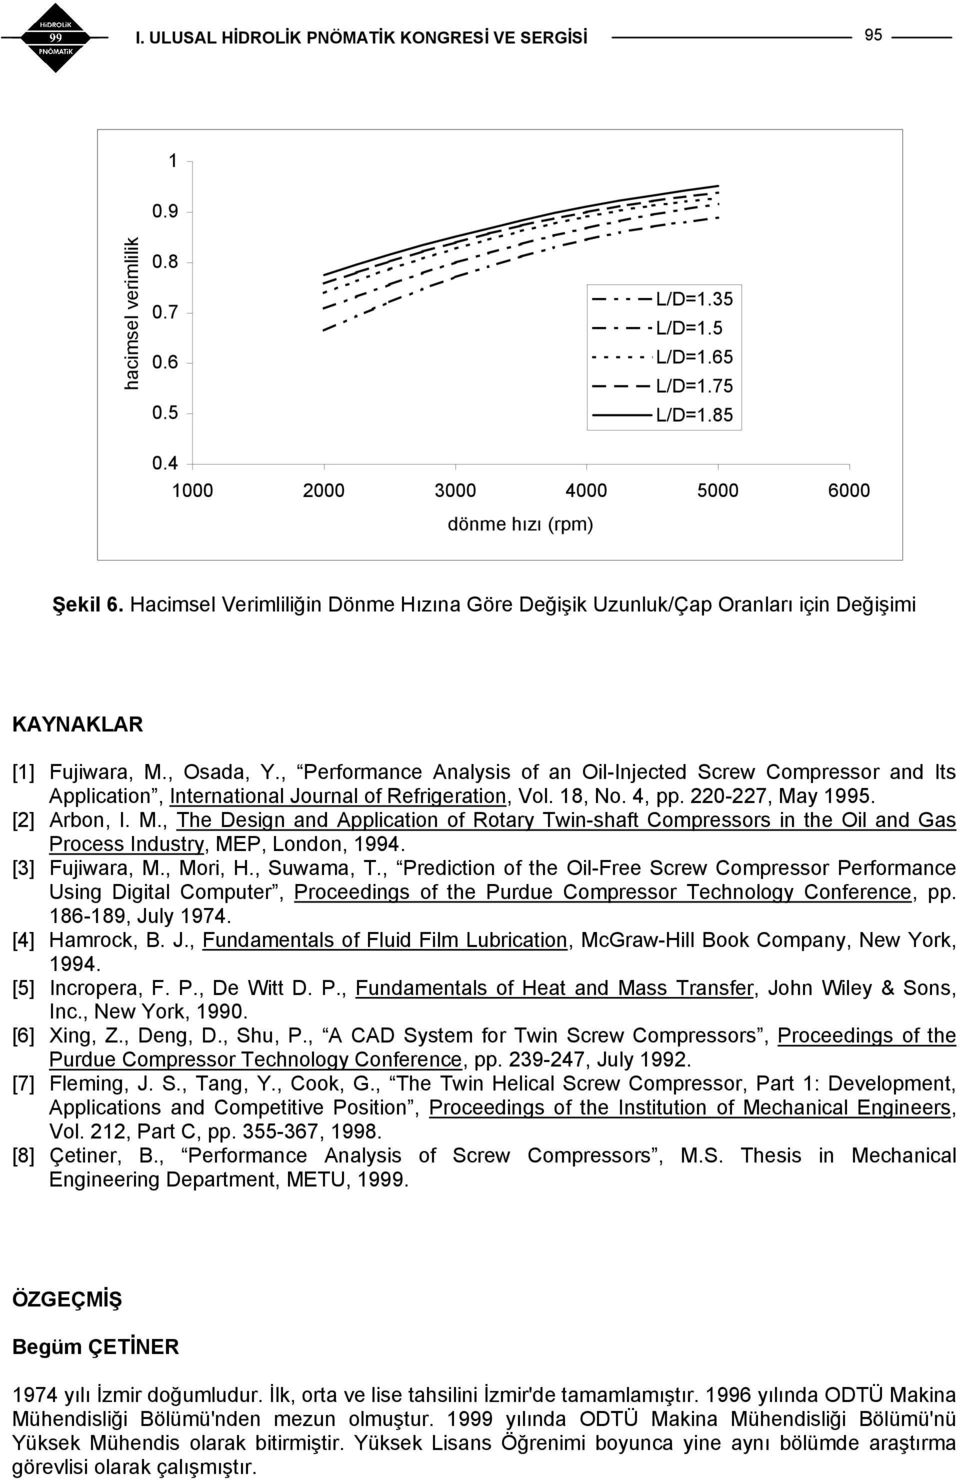 , Performance Analysis of an Oil-Injected Screw Compressor and Its Application, International Journal of Refrigeration, Vol. 18, No. 4, pp. 220-227, Ma